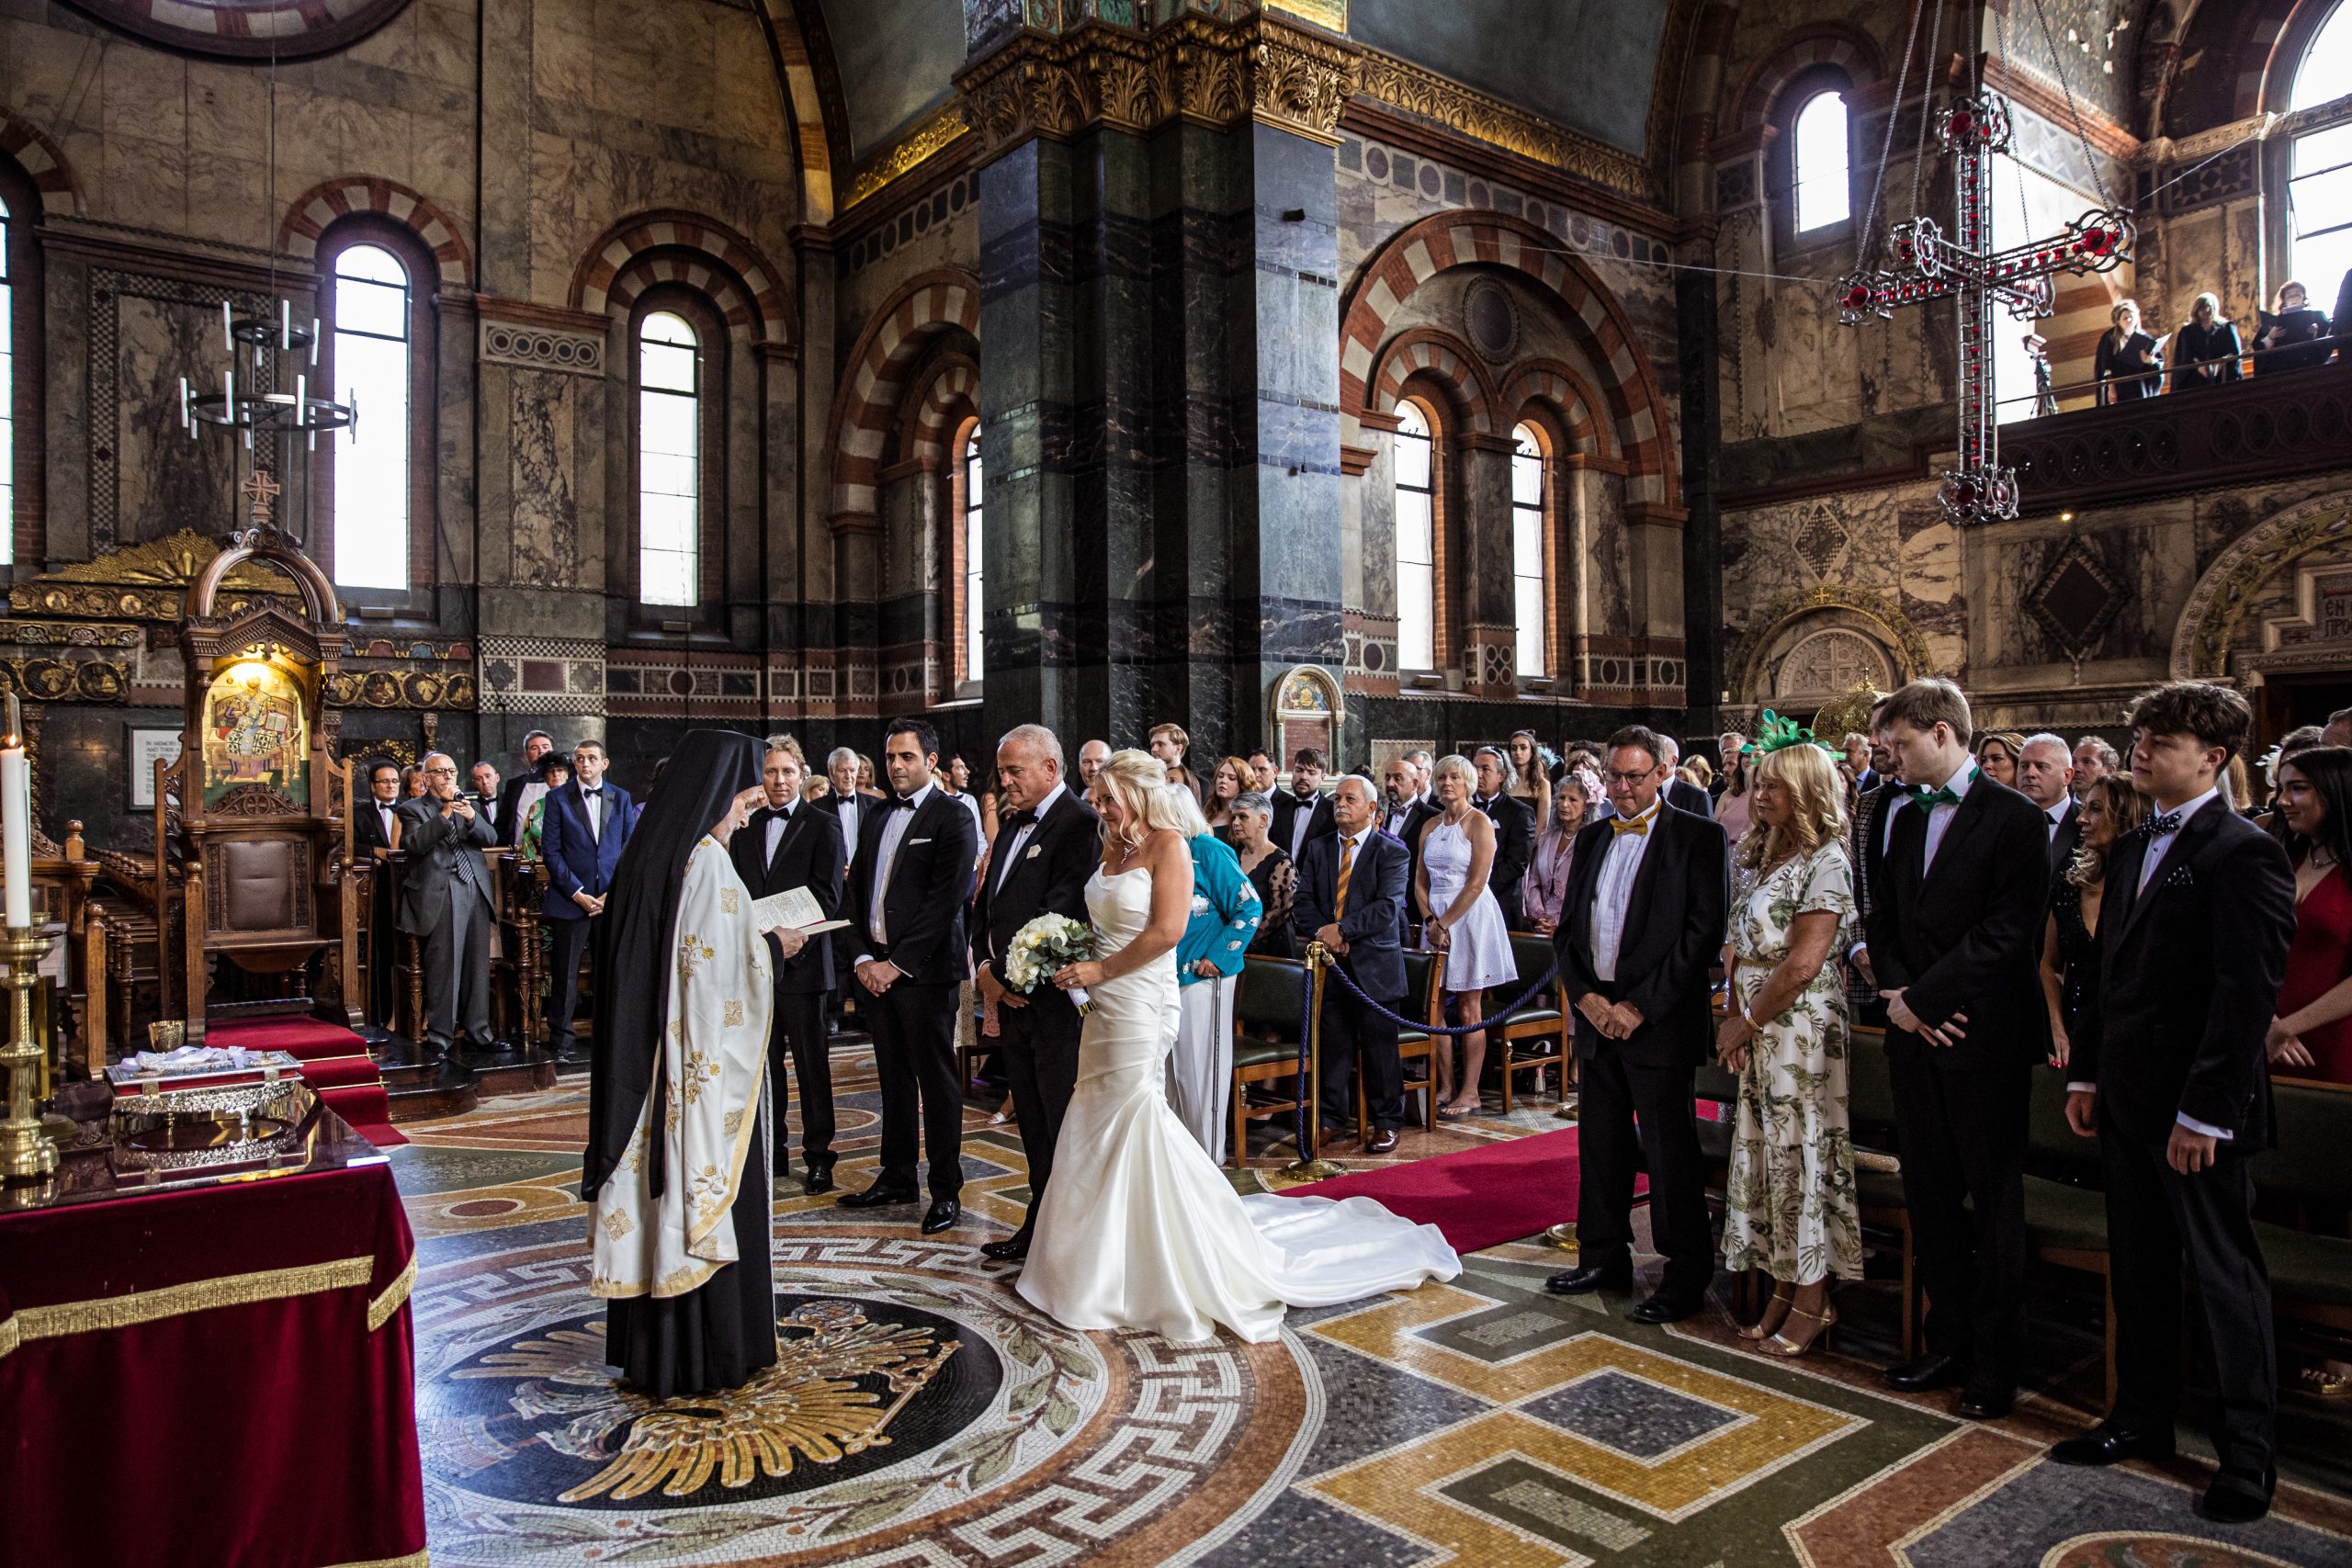 The wedding congregation at the St Sophia greek orthodox church in Moscow Road, London